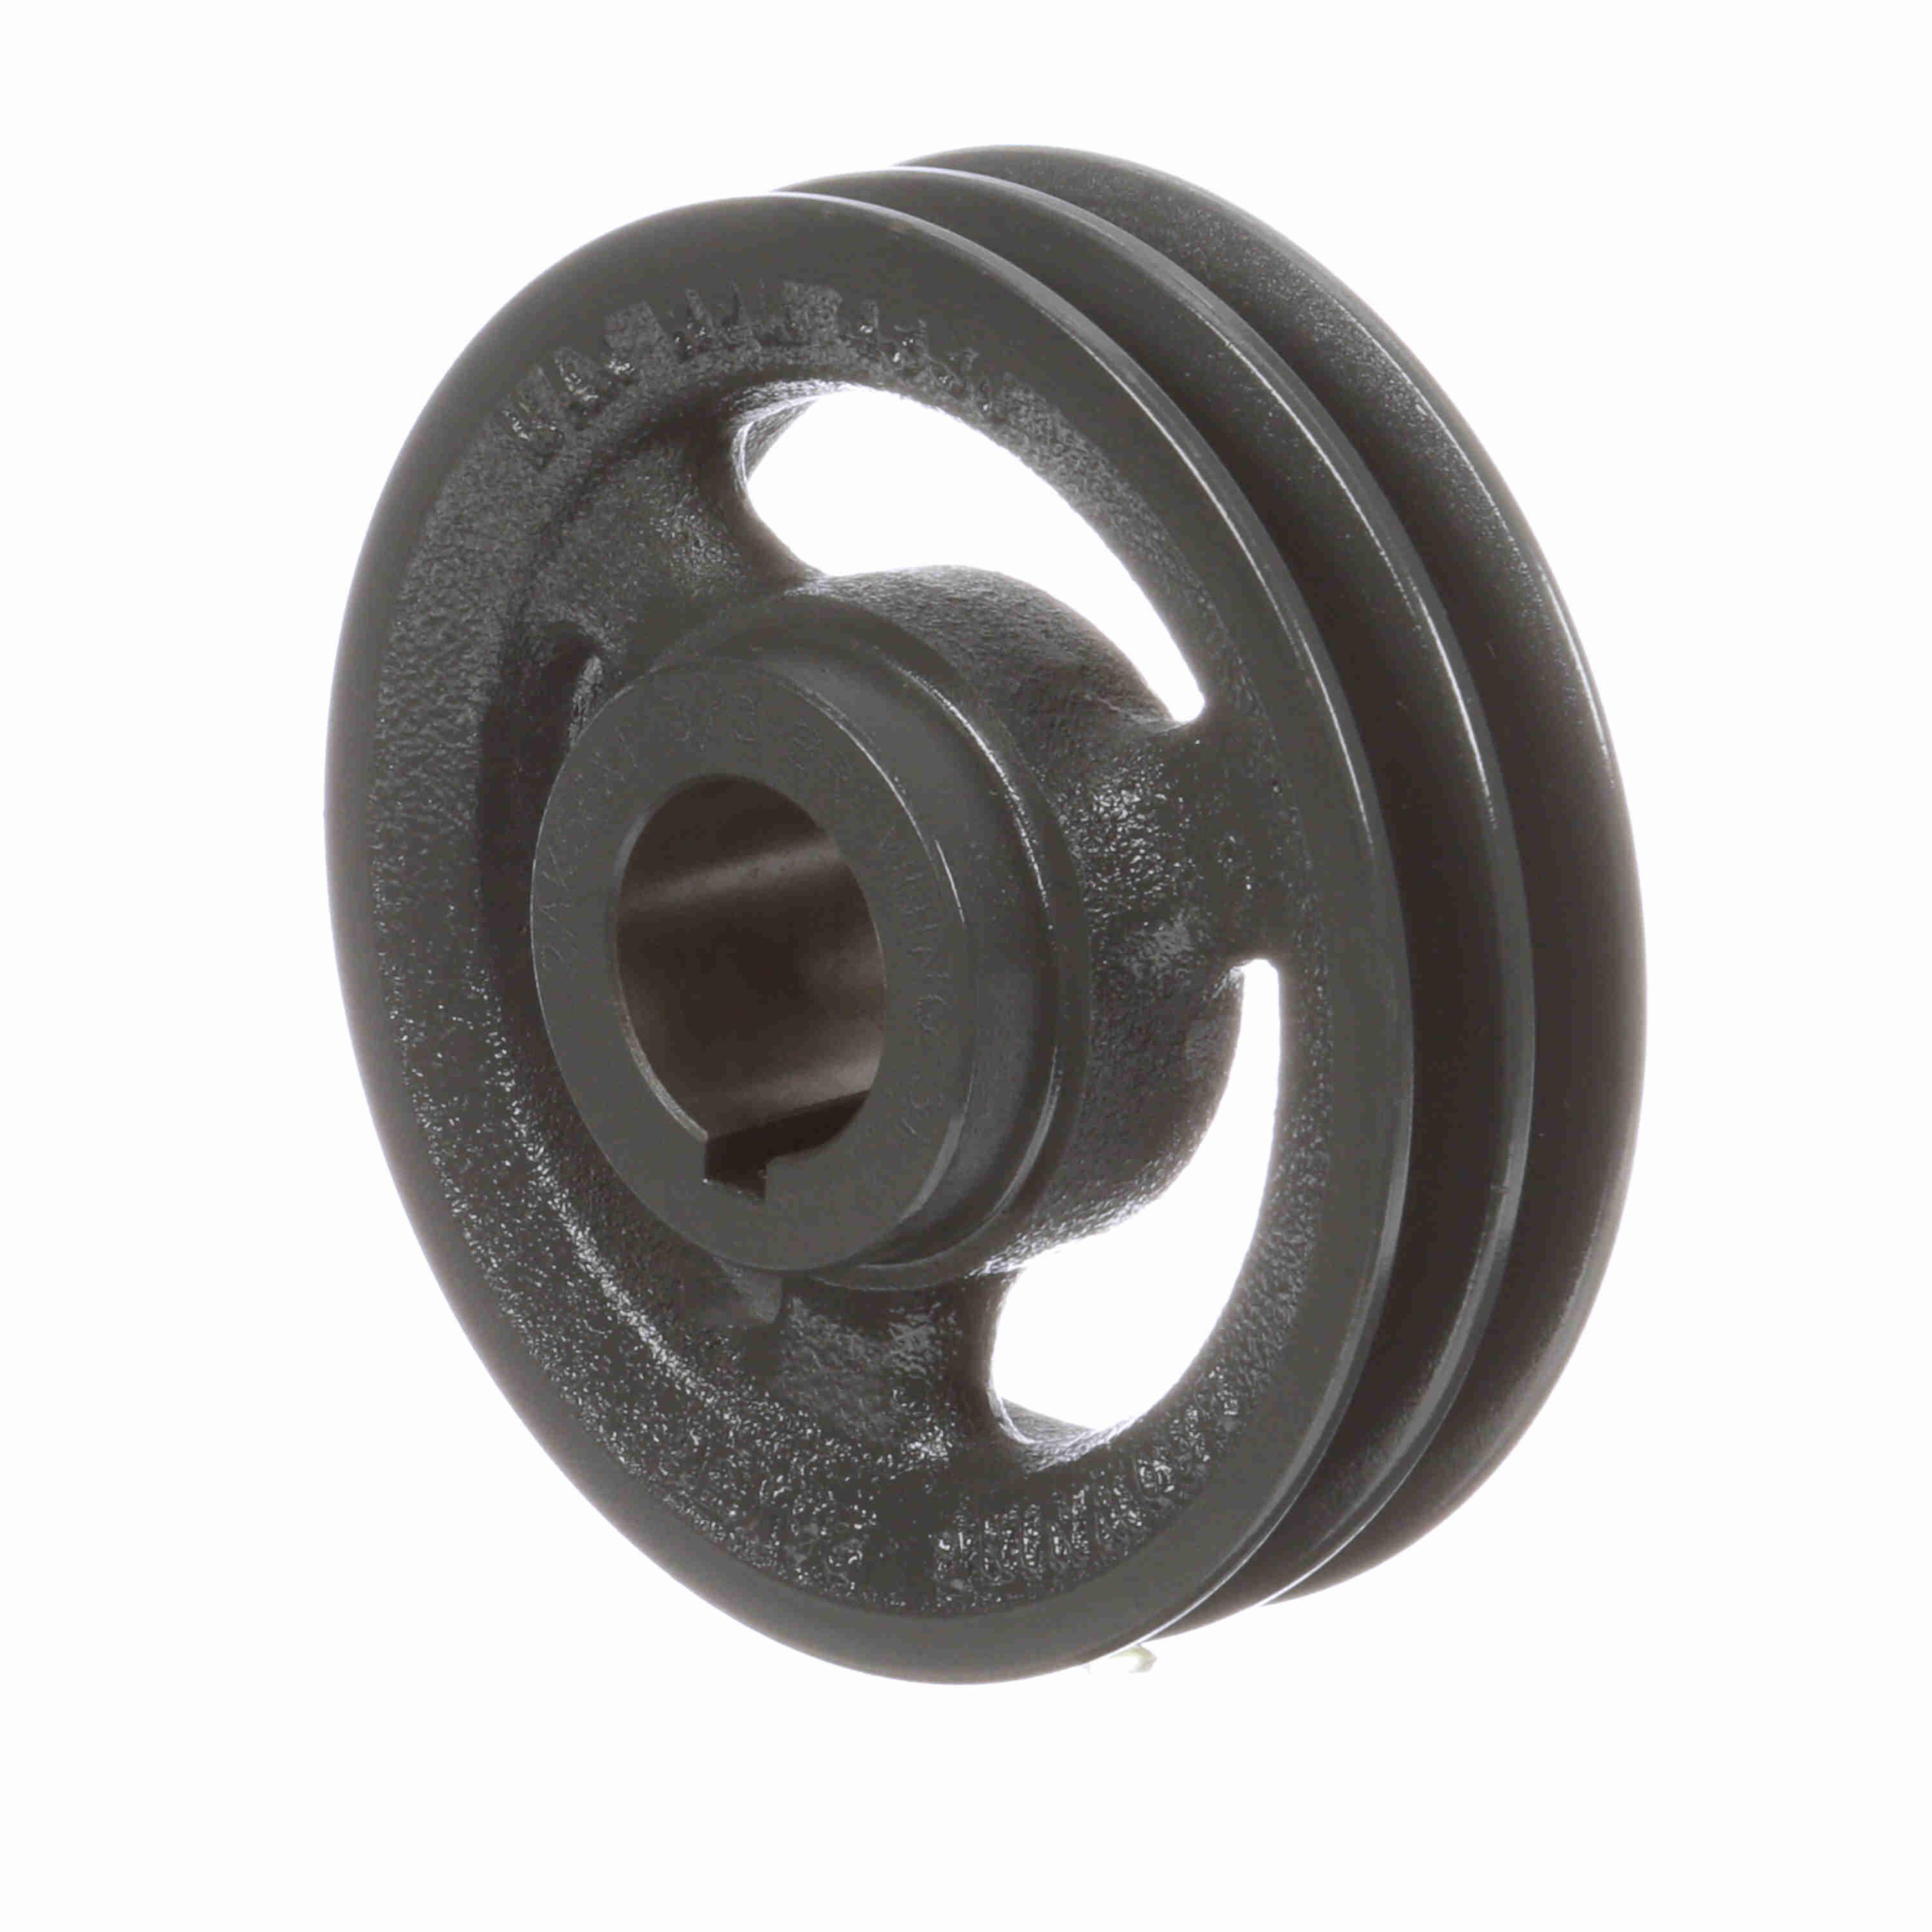 NEW NO BOX BROWNING PULLEY CAST IRON SHEAVE OK35N OK35 N 191-1 